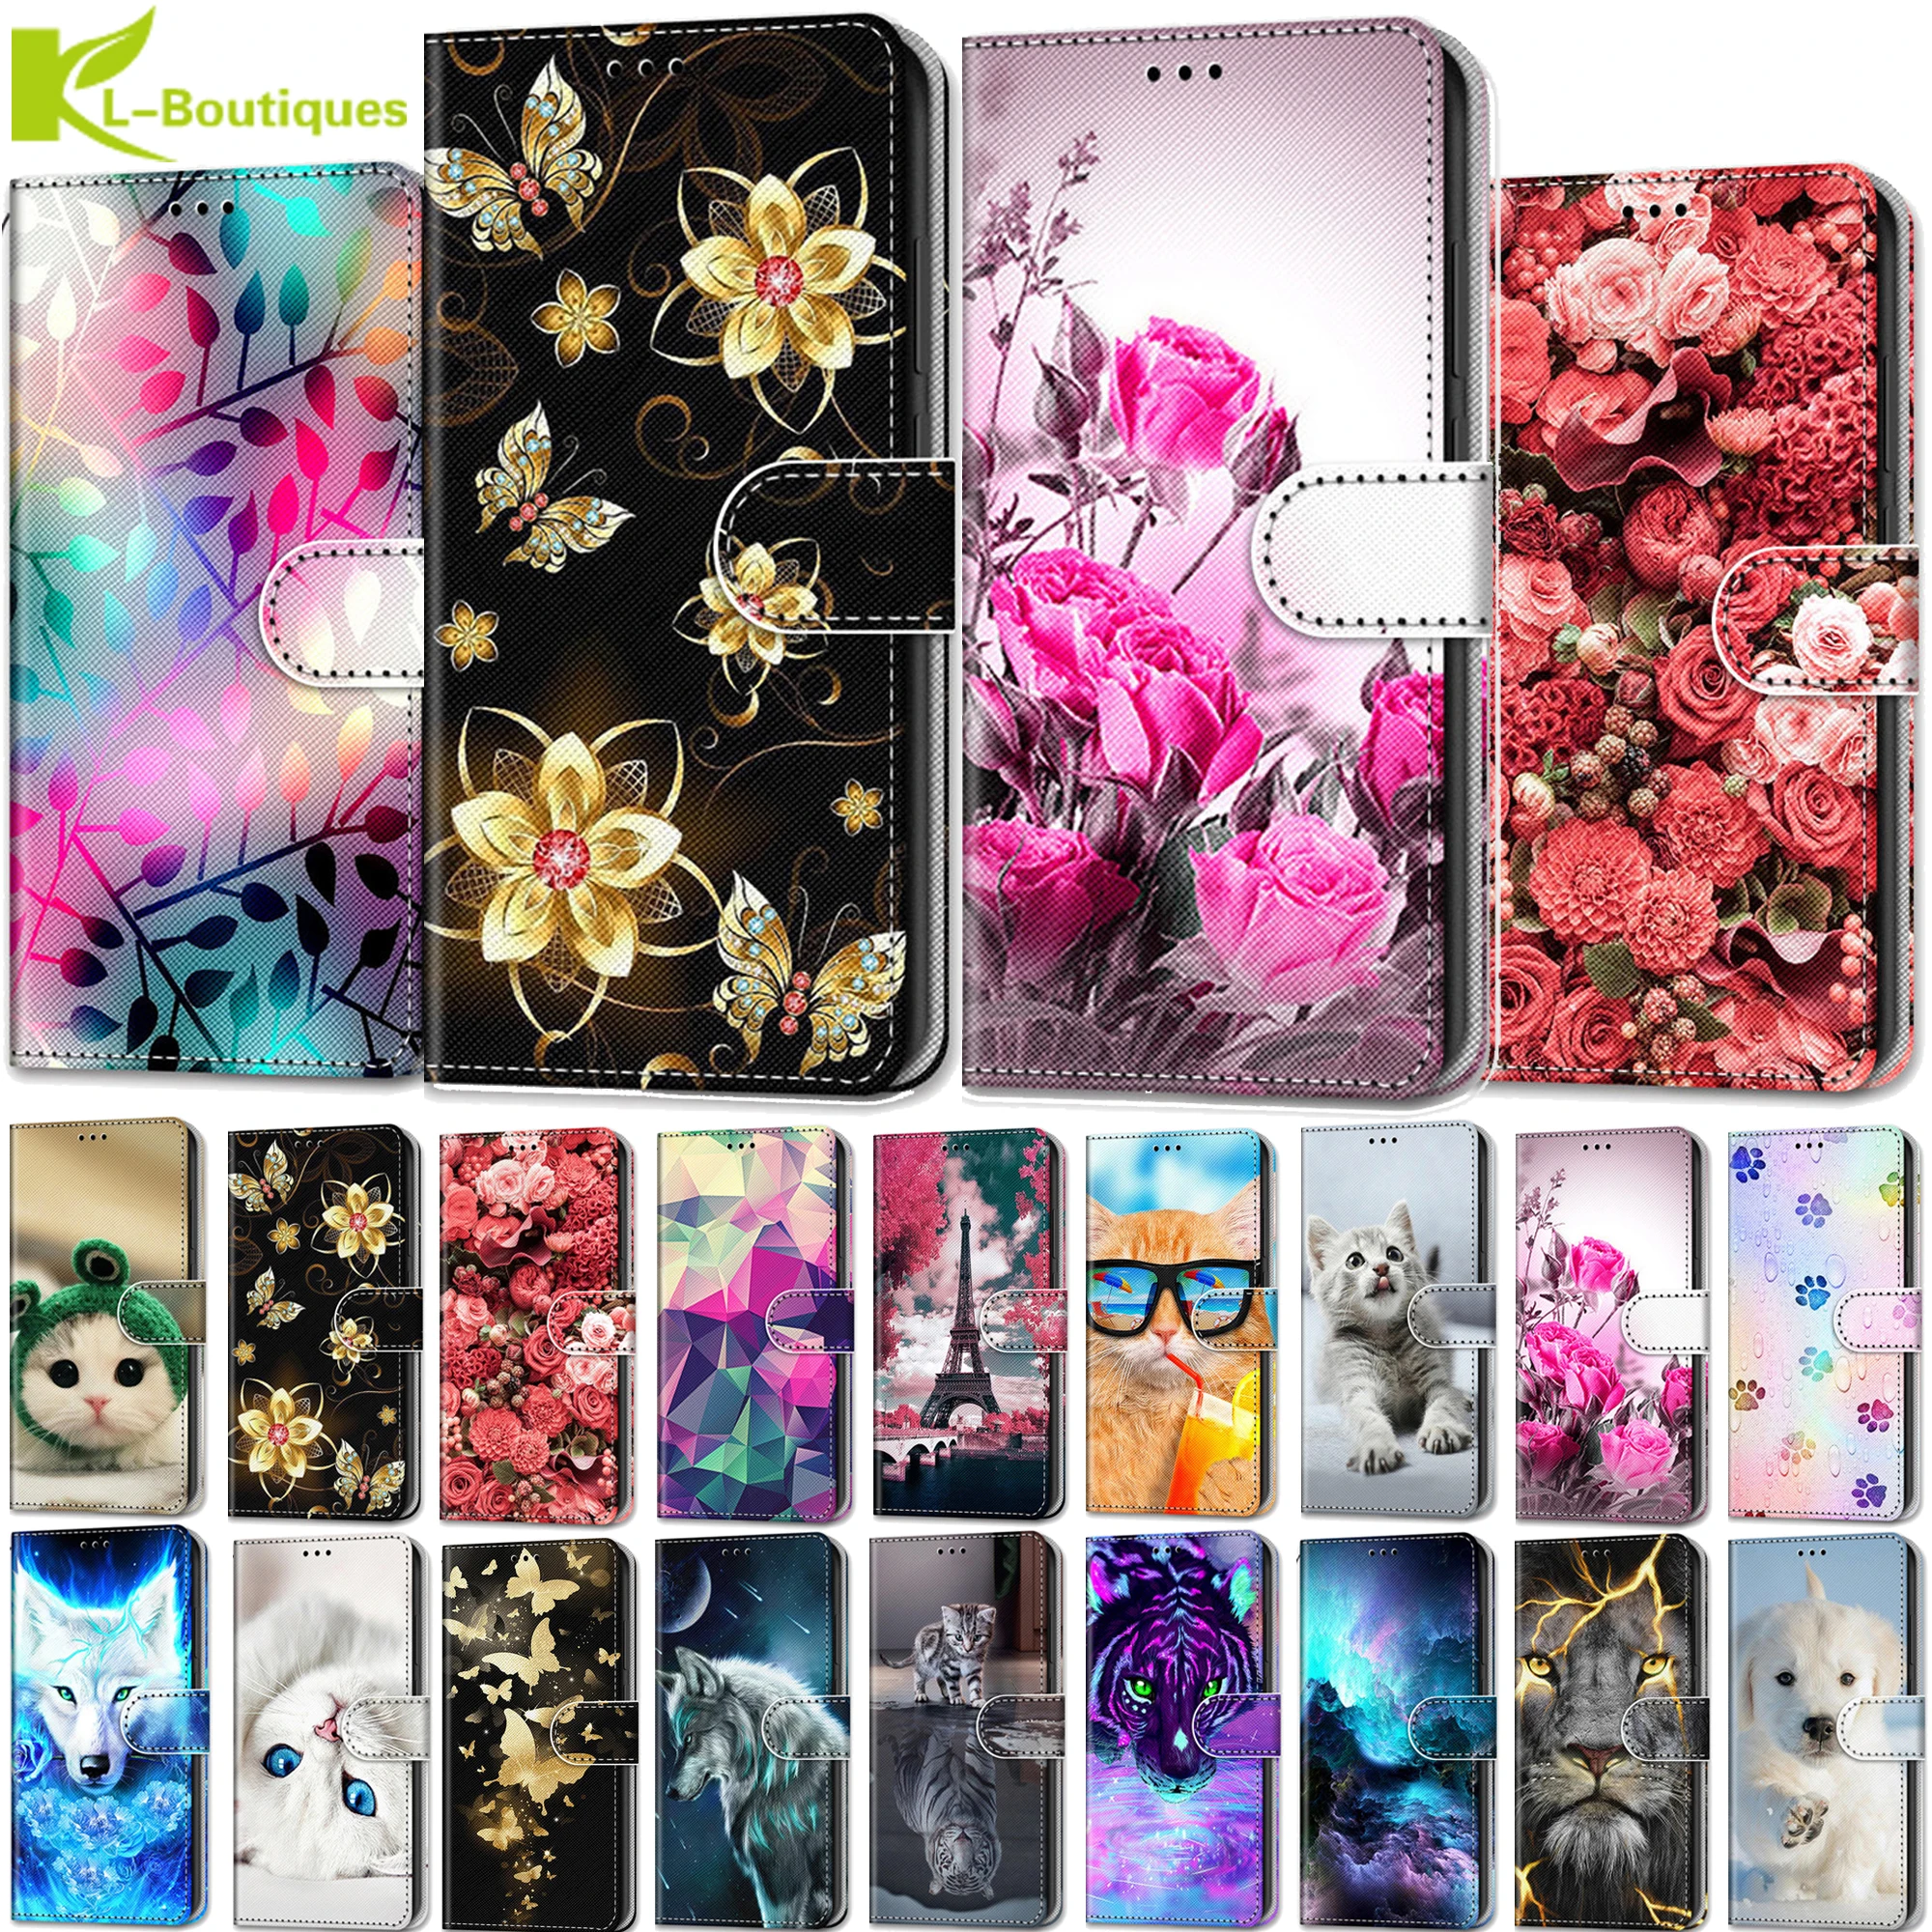 

S20 Plus case leather magnet flip etui for Samsung Galaxy S20 Plus A51 71 A20 E A30 50 S case wallet painted cover